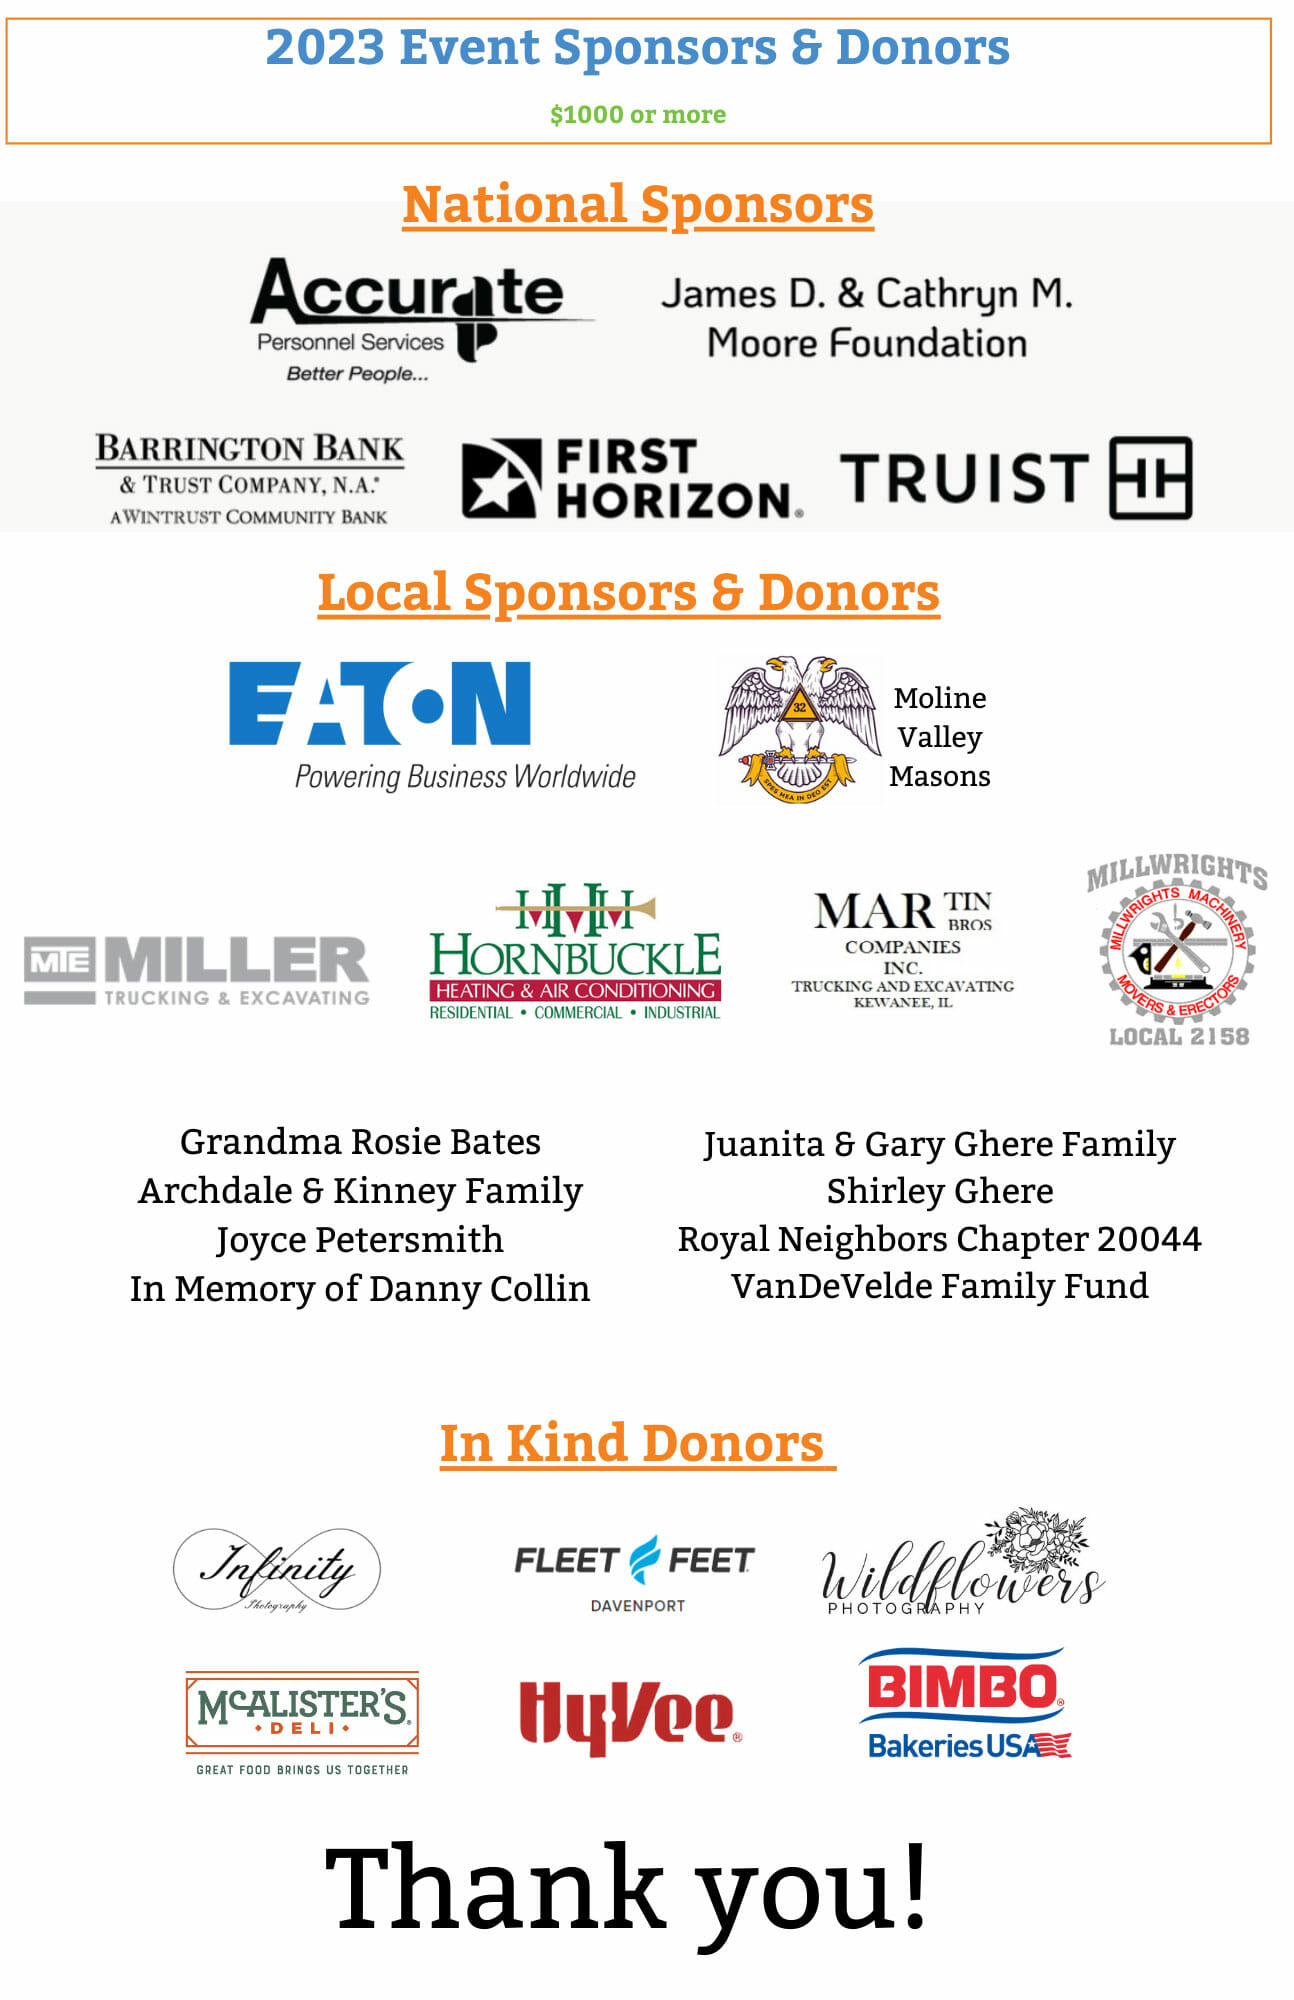 Quad-Cities-2023-Event-Sponsors-&-Donors-